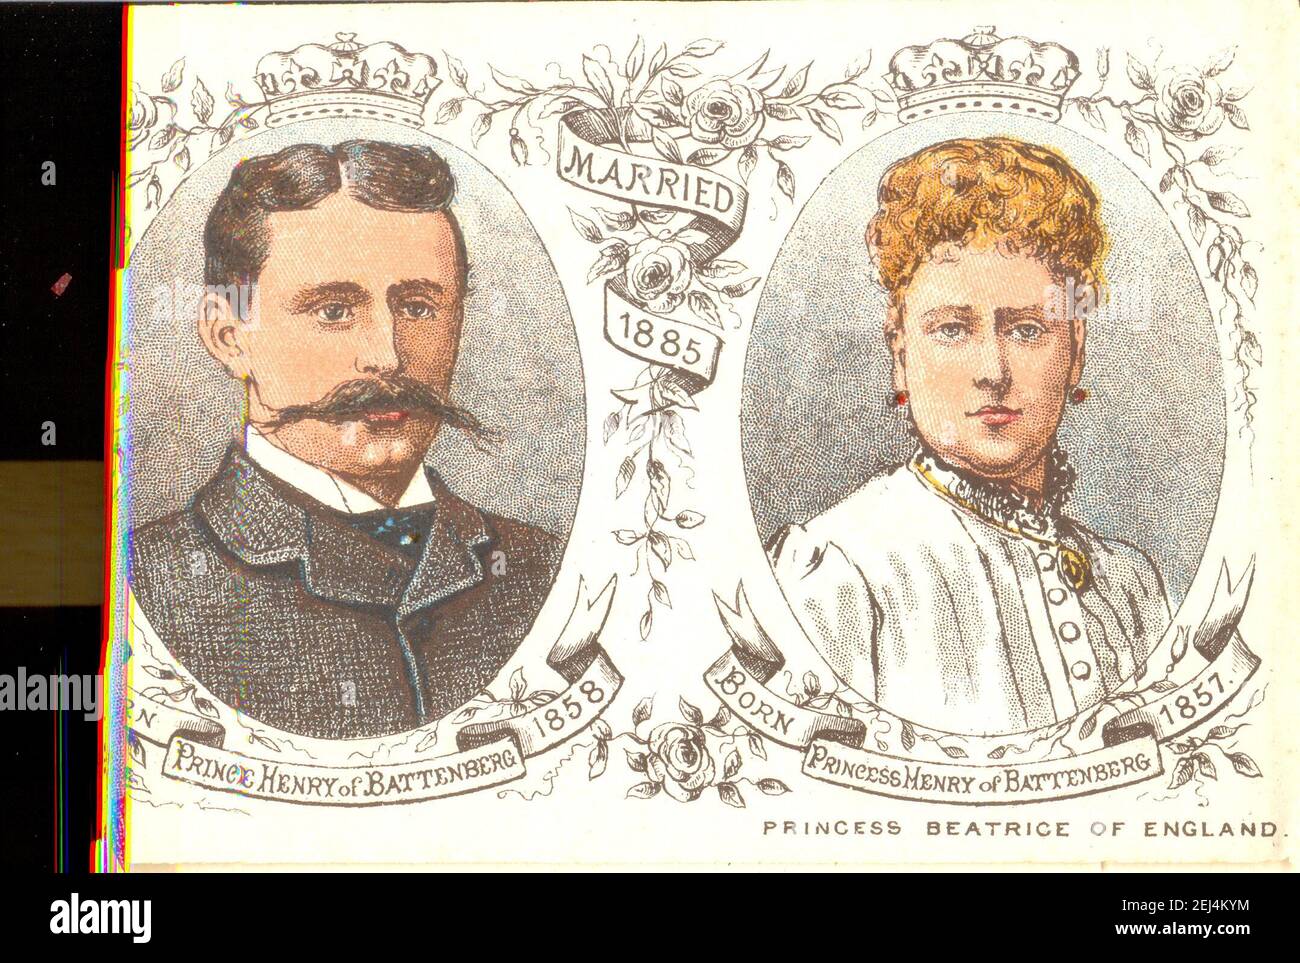 Portraits of the Prince and Princess Henry of Battenberg from the souvenir booklet celebrating The Queen  and the Royal Family a memento of Her Majesty's Glorious Reign  1887 Stock Photo